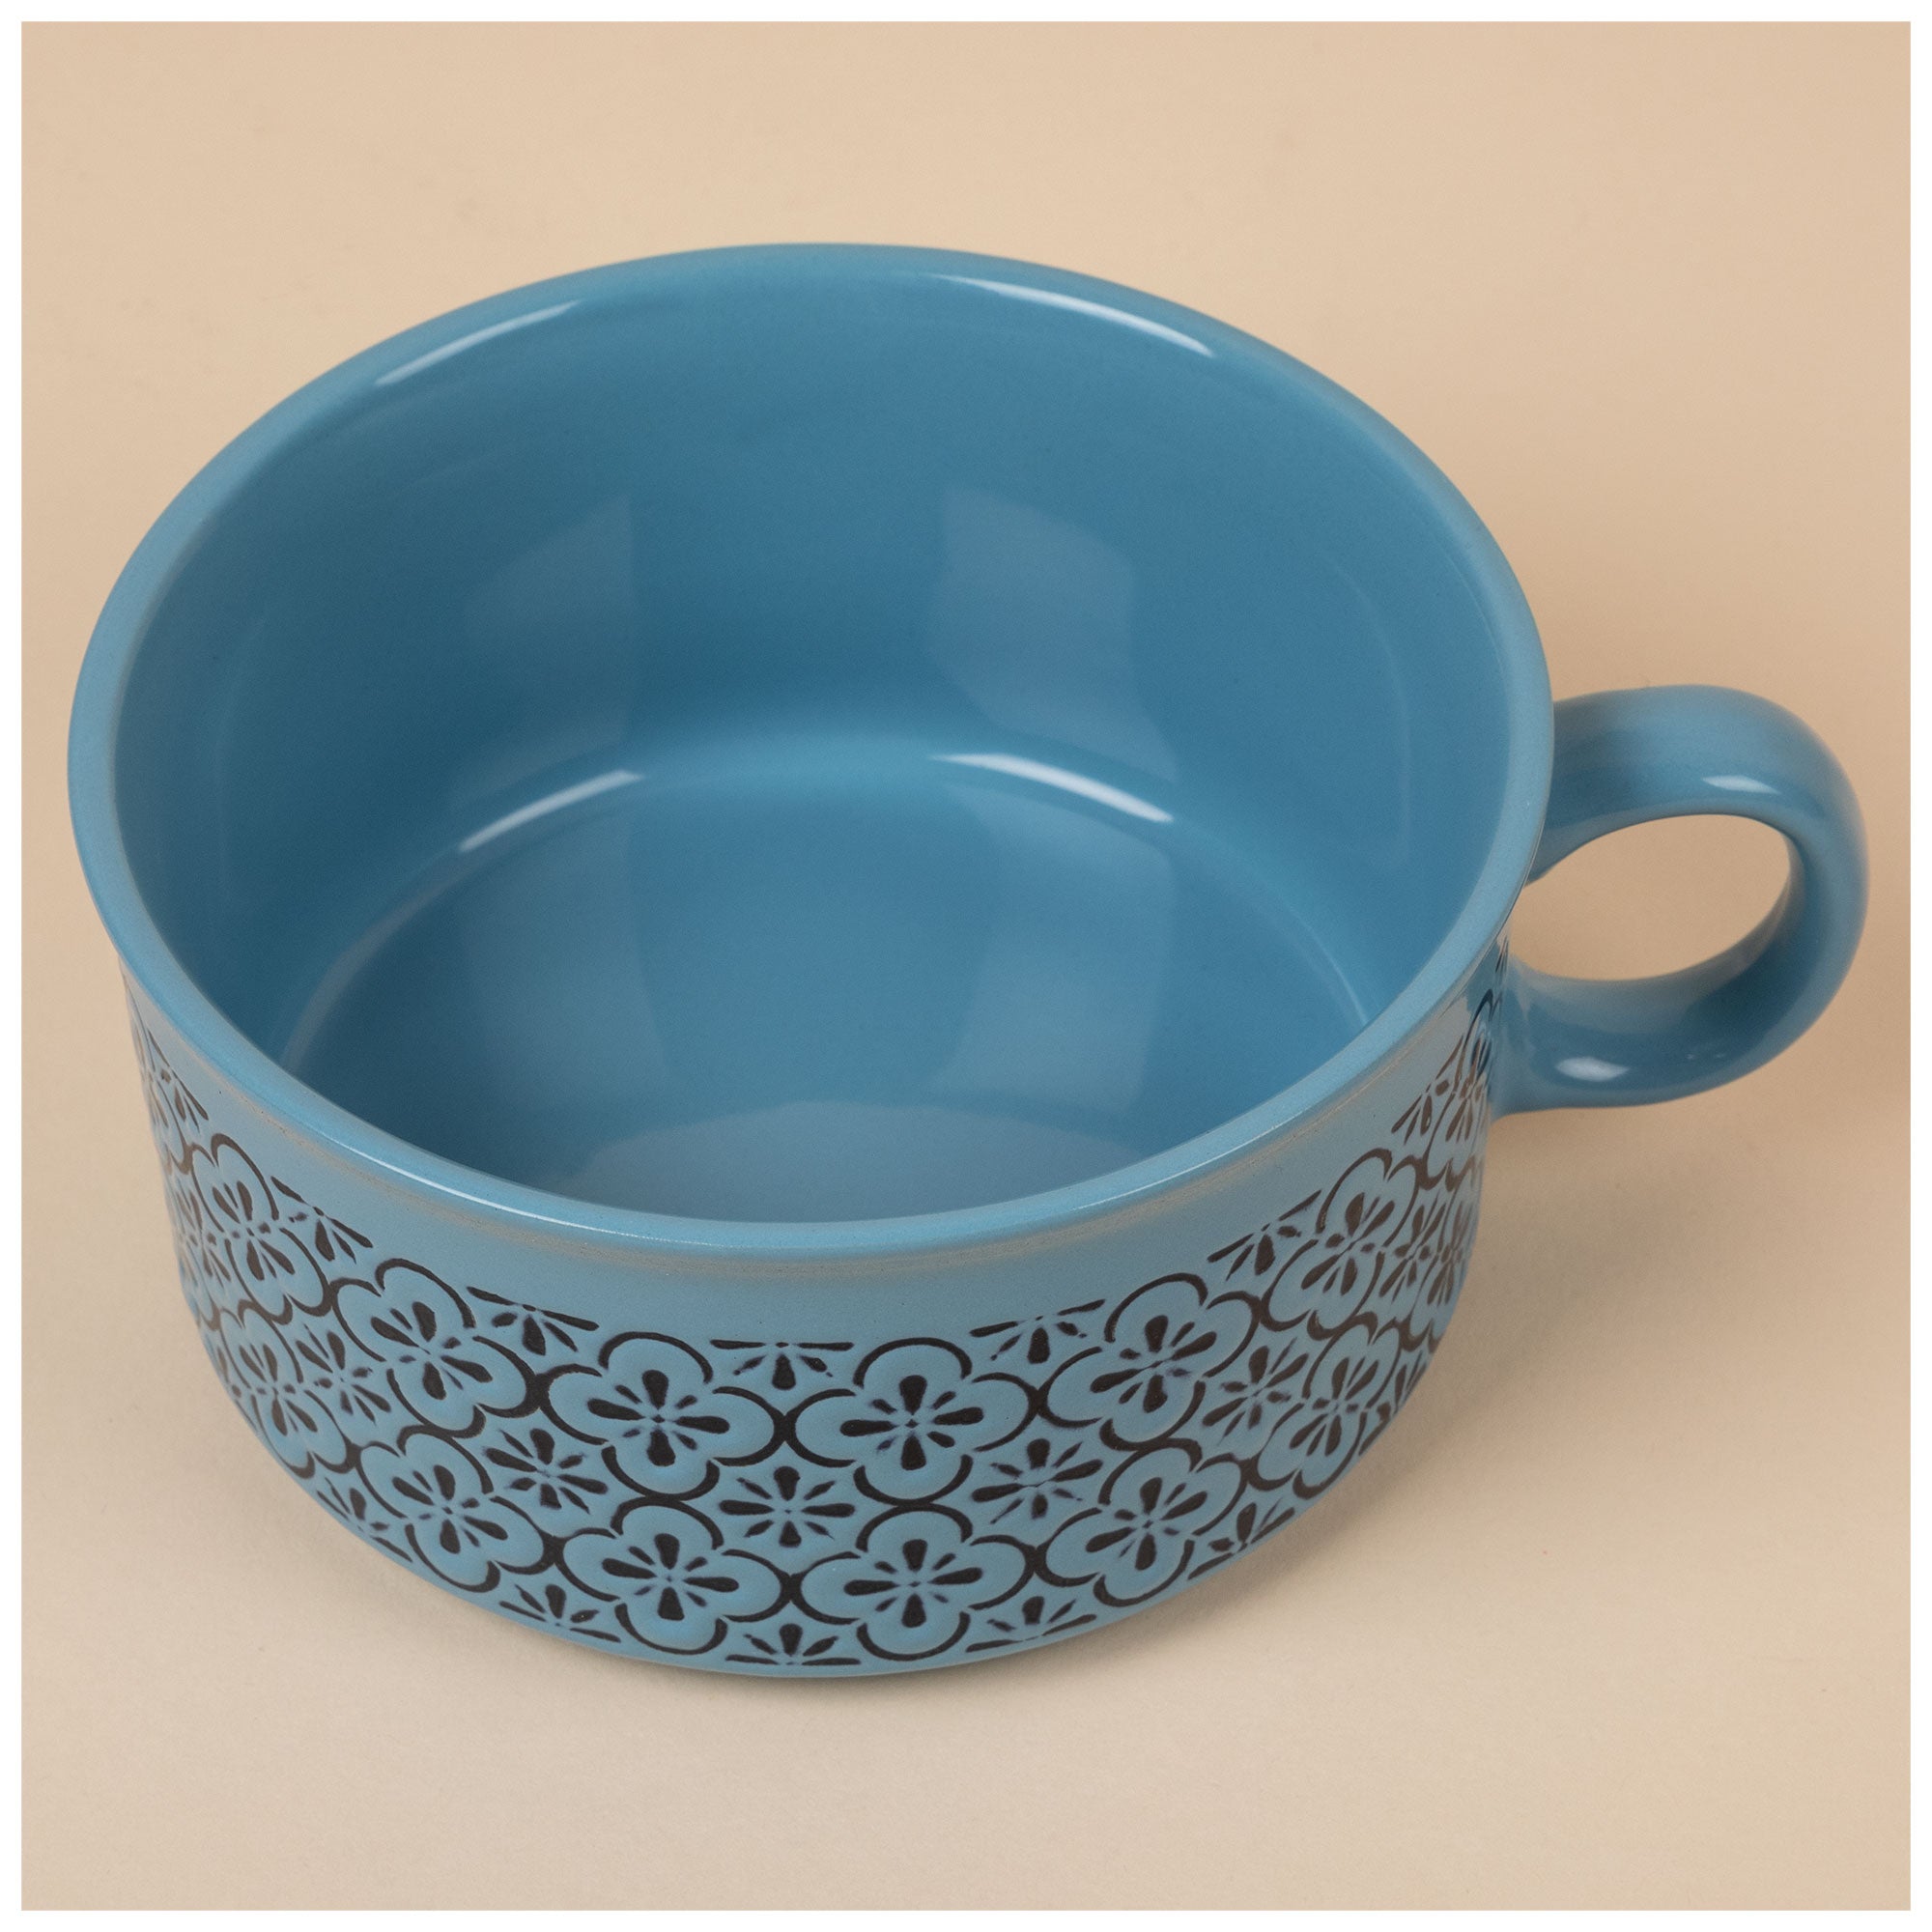 Lovely Blue Souper Mug With Lid - Blue Floral Checkers